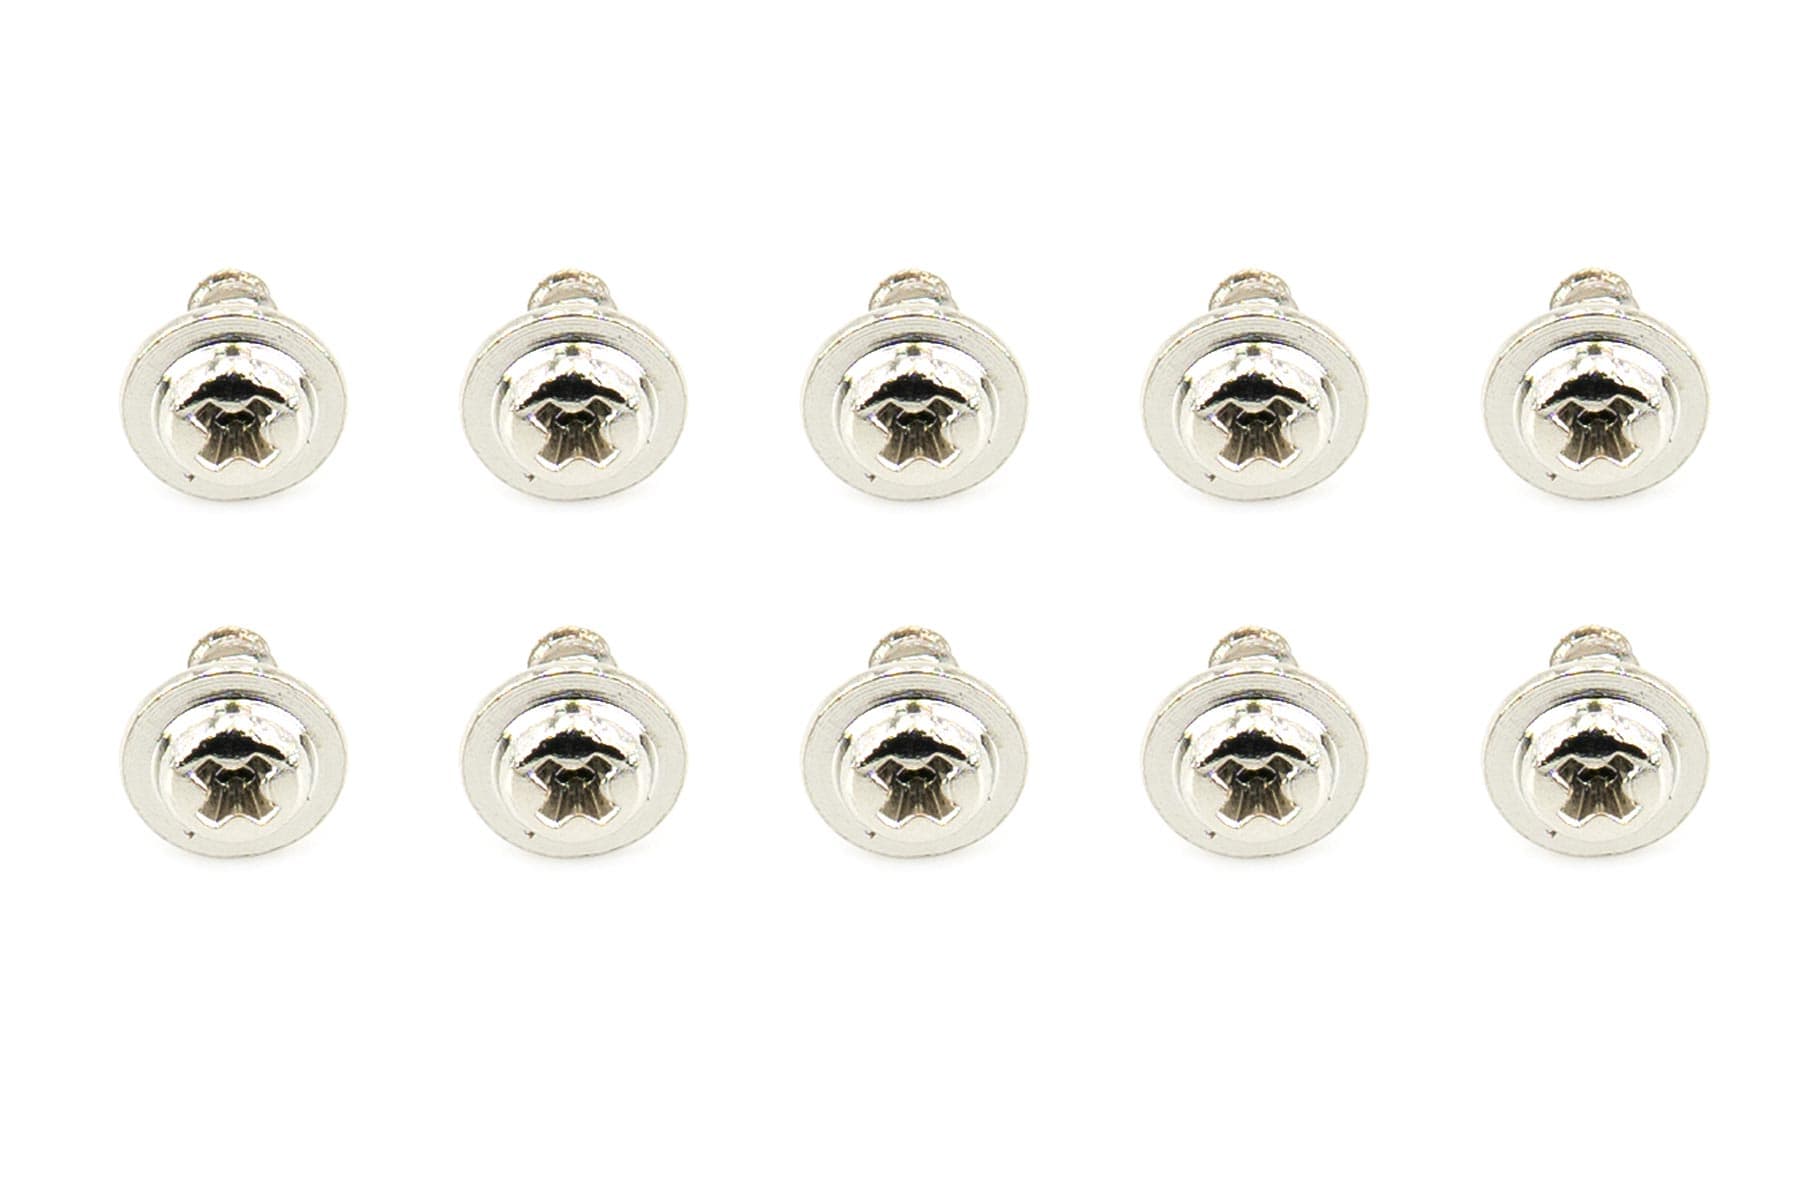 BenchCraft 2.5mm x 6mm Self-Tapping Washer Head Screws (10 Pack) BCT5040-054